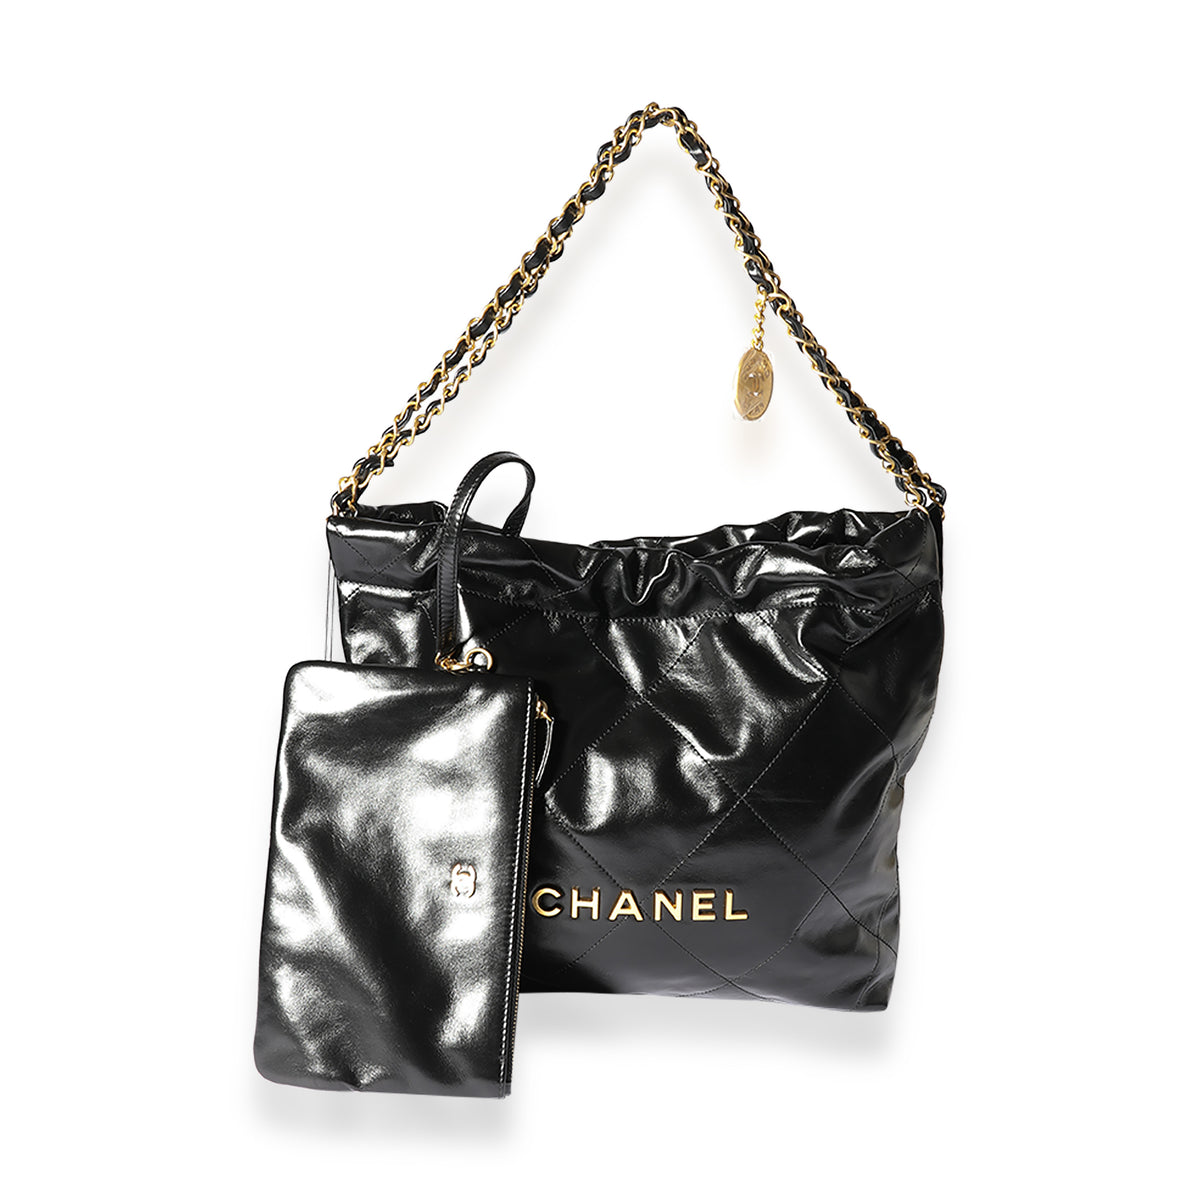 Chanel Black Shiny Calfskin Quilted Small Chanel 22 Bag